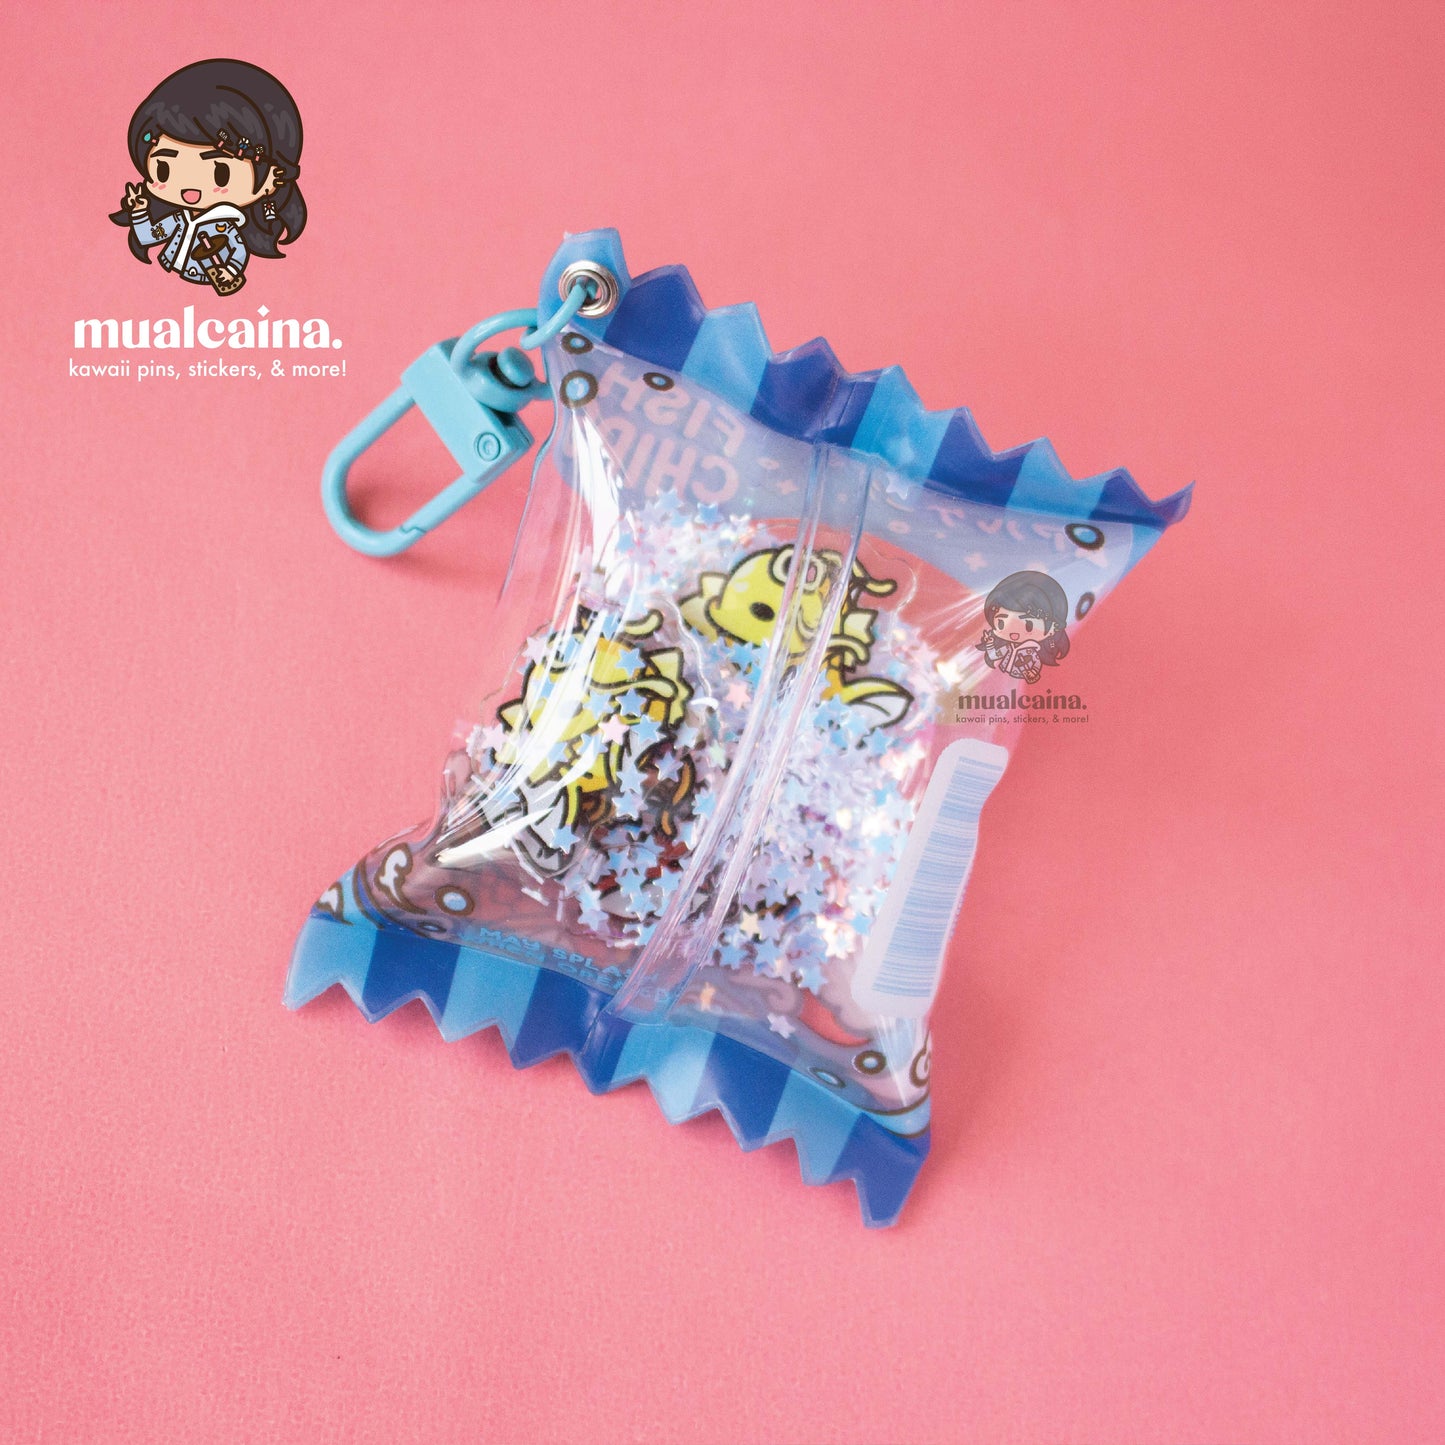 Fish Chips Bag Shaker Keychain [DISCOUNTED - FINAL SALE]